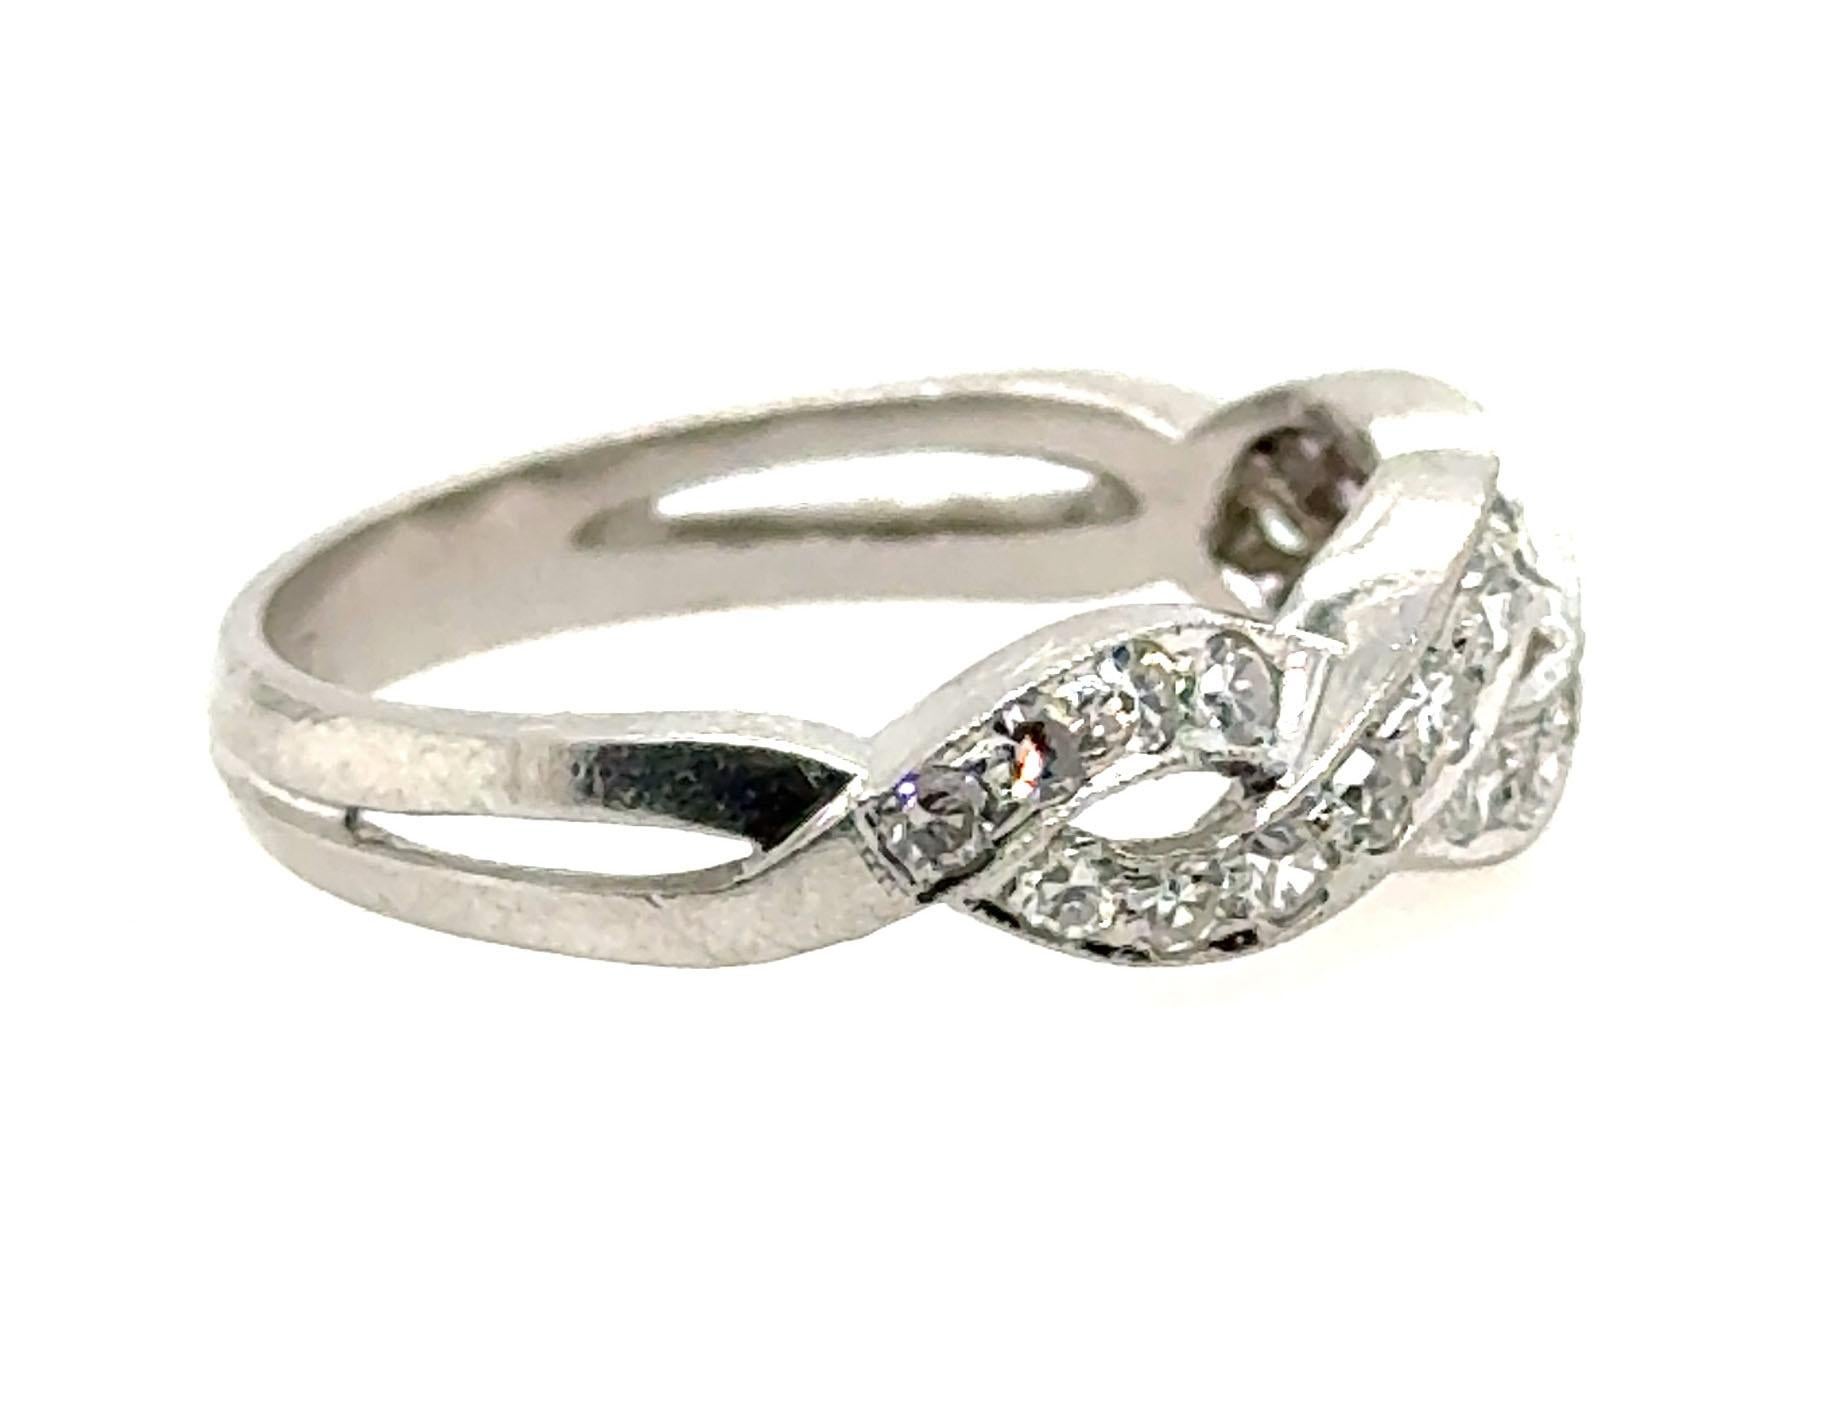 Genuine Original Art Deco Antique from 1930's Infinity Twist Diamond Ring 1/2ct Single Cuts Platinum 


A Timeless Beauty. Crafted in Platinum, it Features 1/2-carat Genuine Natural Mined Diamonds

Infinity Twist Band, Adding a Touch of